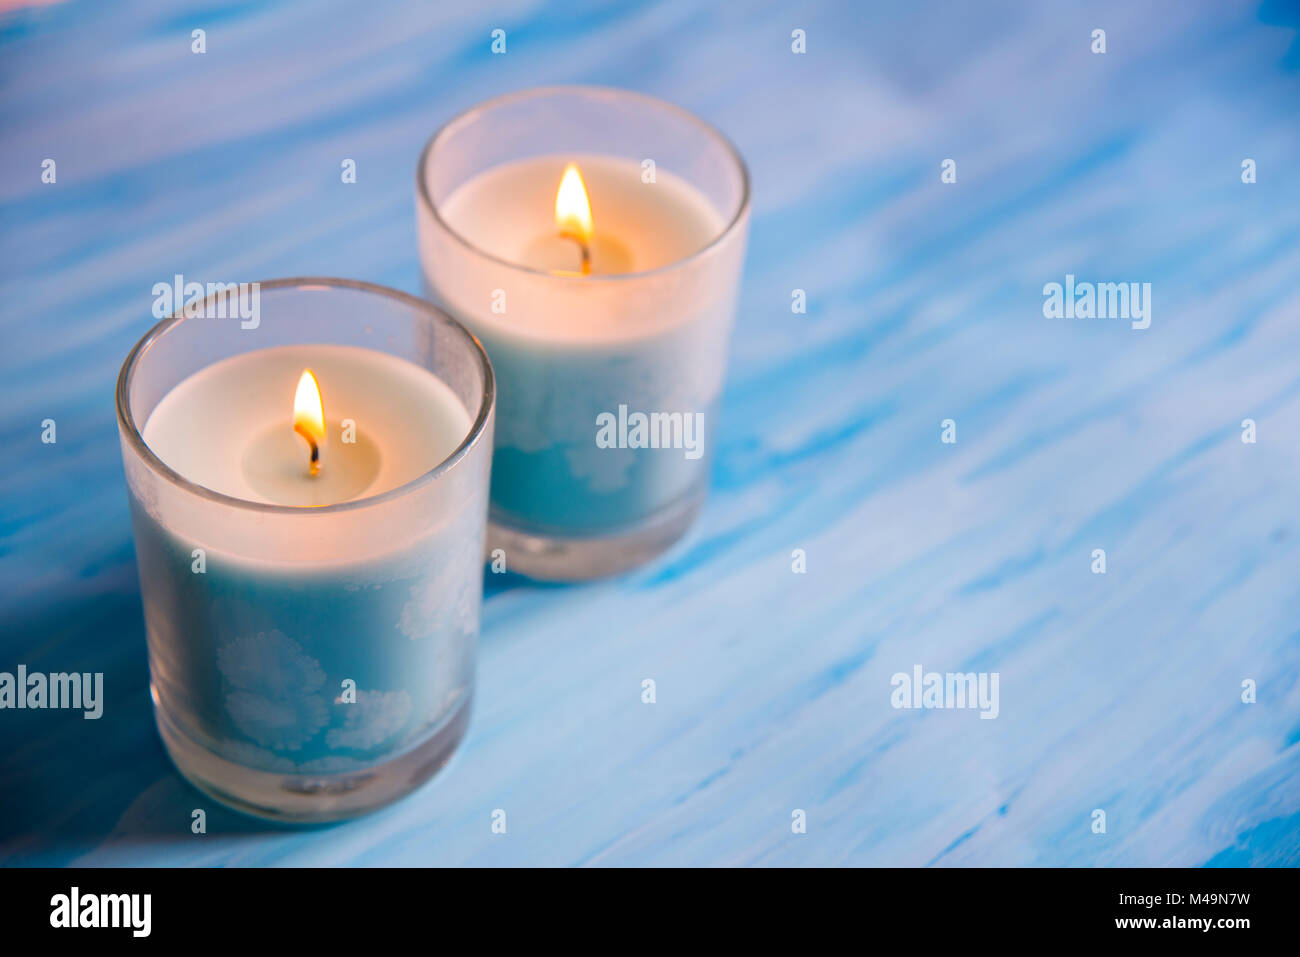 Two lit up candles. Stock Photo